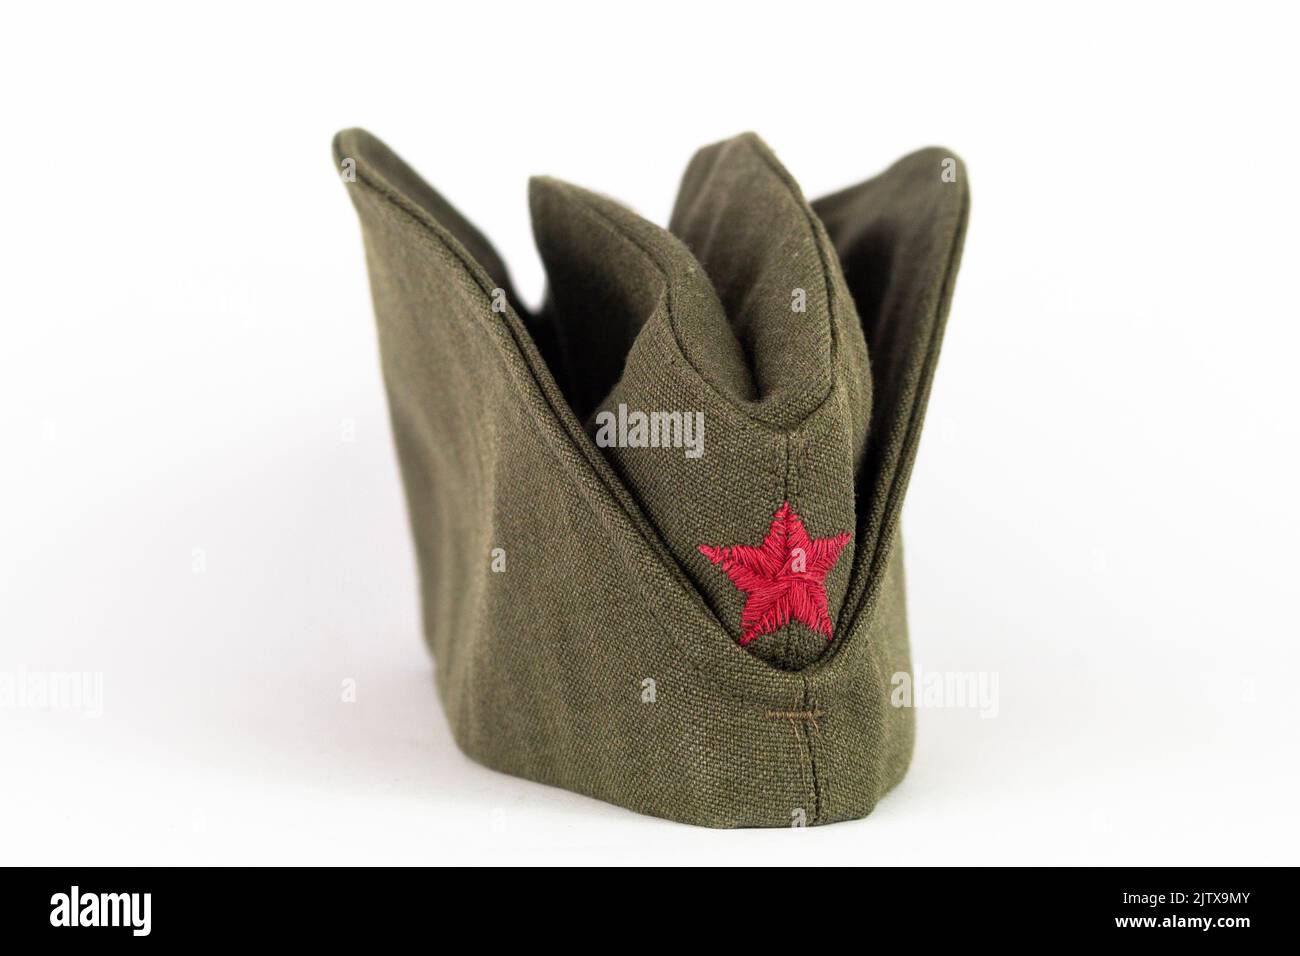 Military cap. Yugoslavian army side cap with red star from the time of communism and world war era. Stock Photo